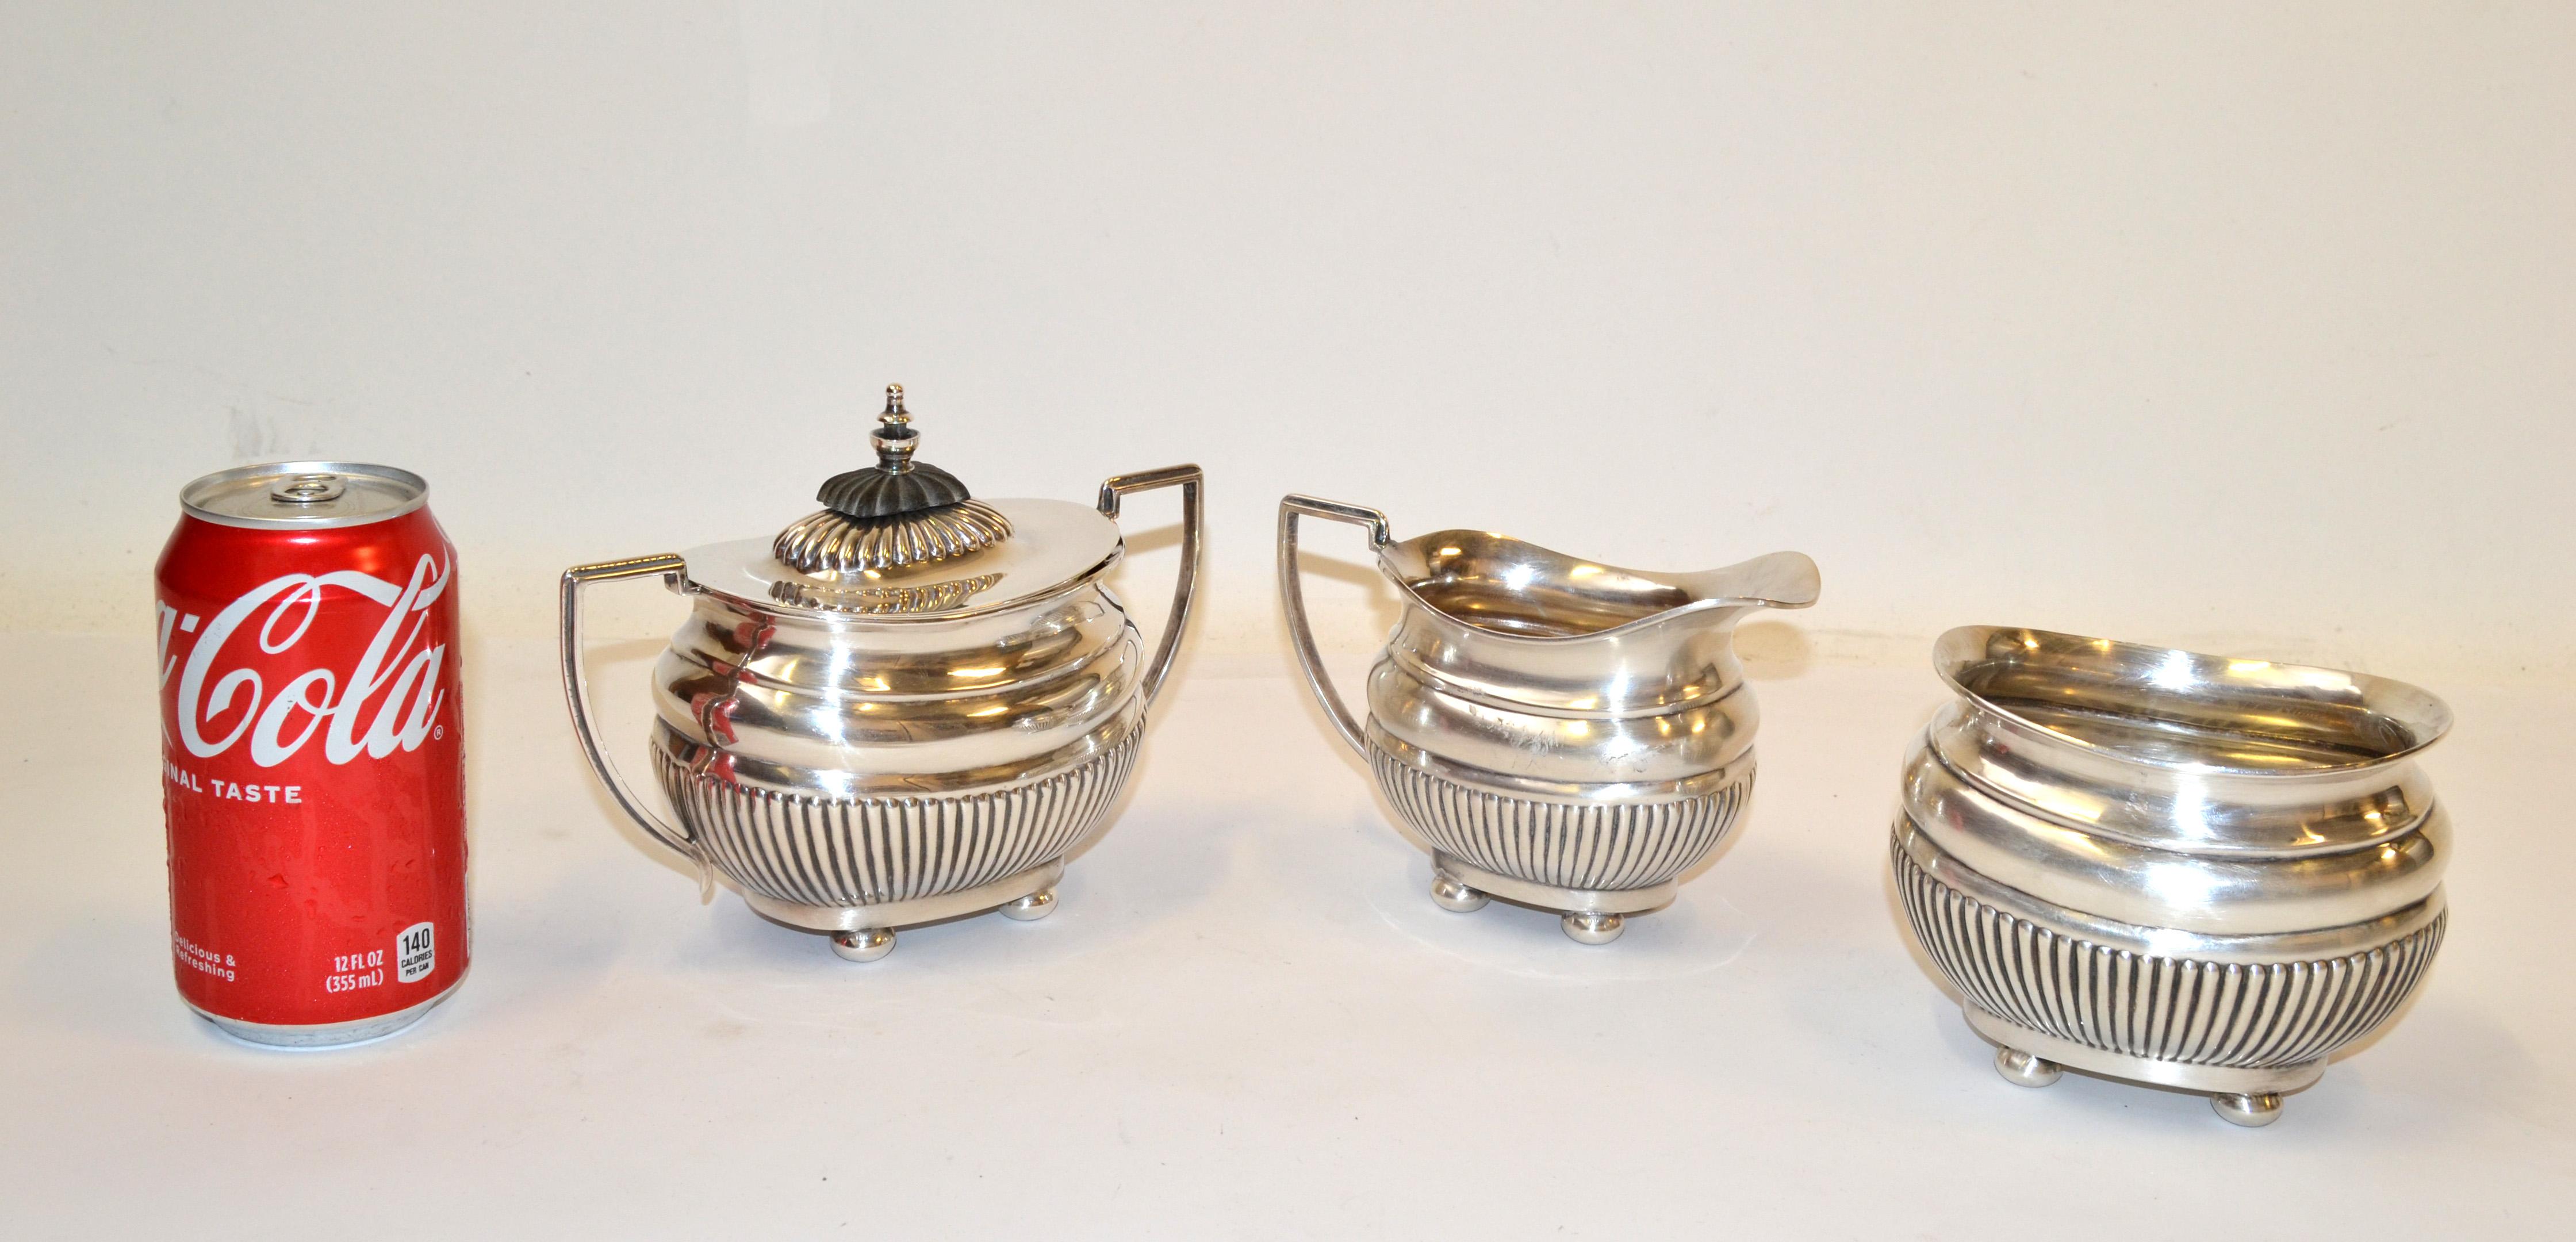 Early 20th Century British Colonial Antique 1910 Cheltenham Silver Coffee Service Sheffield England For Sale